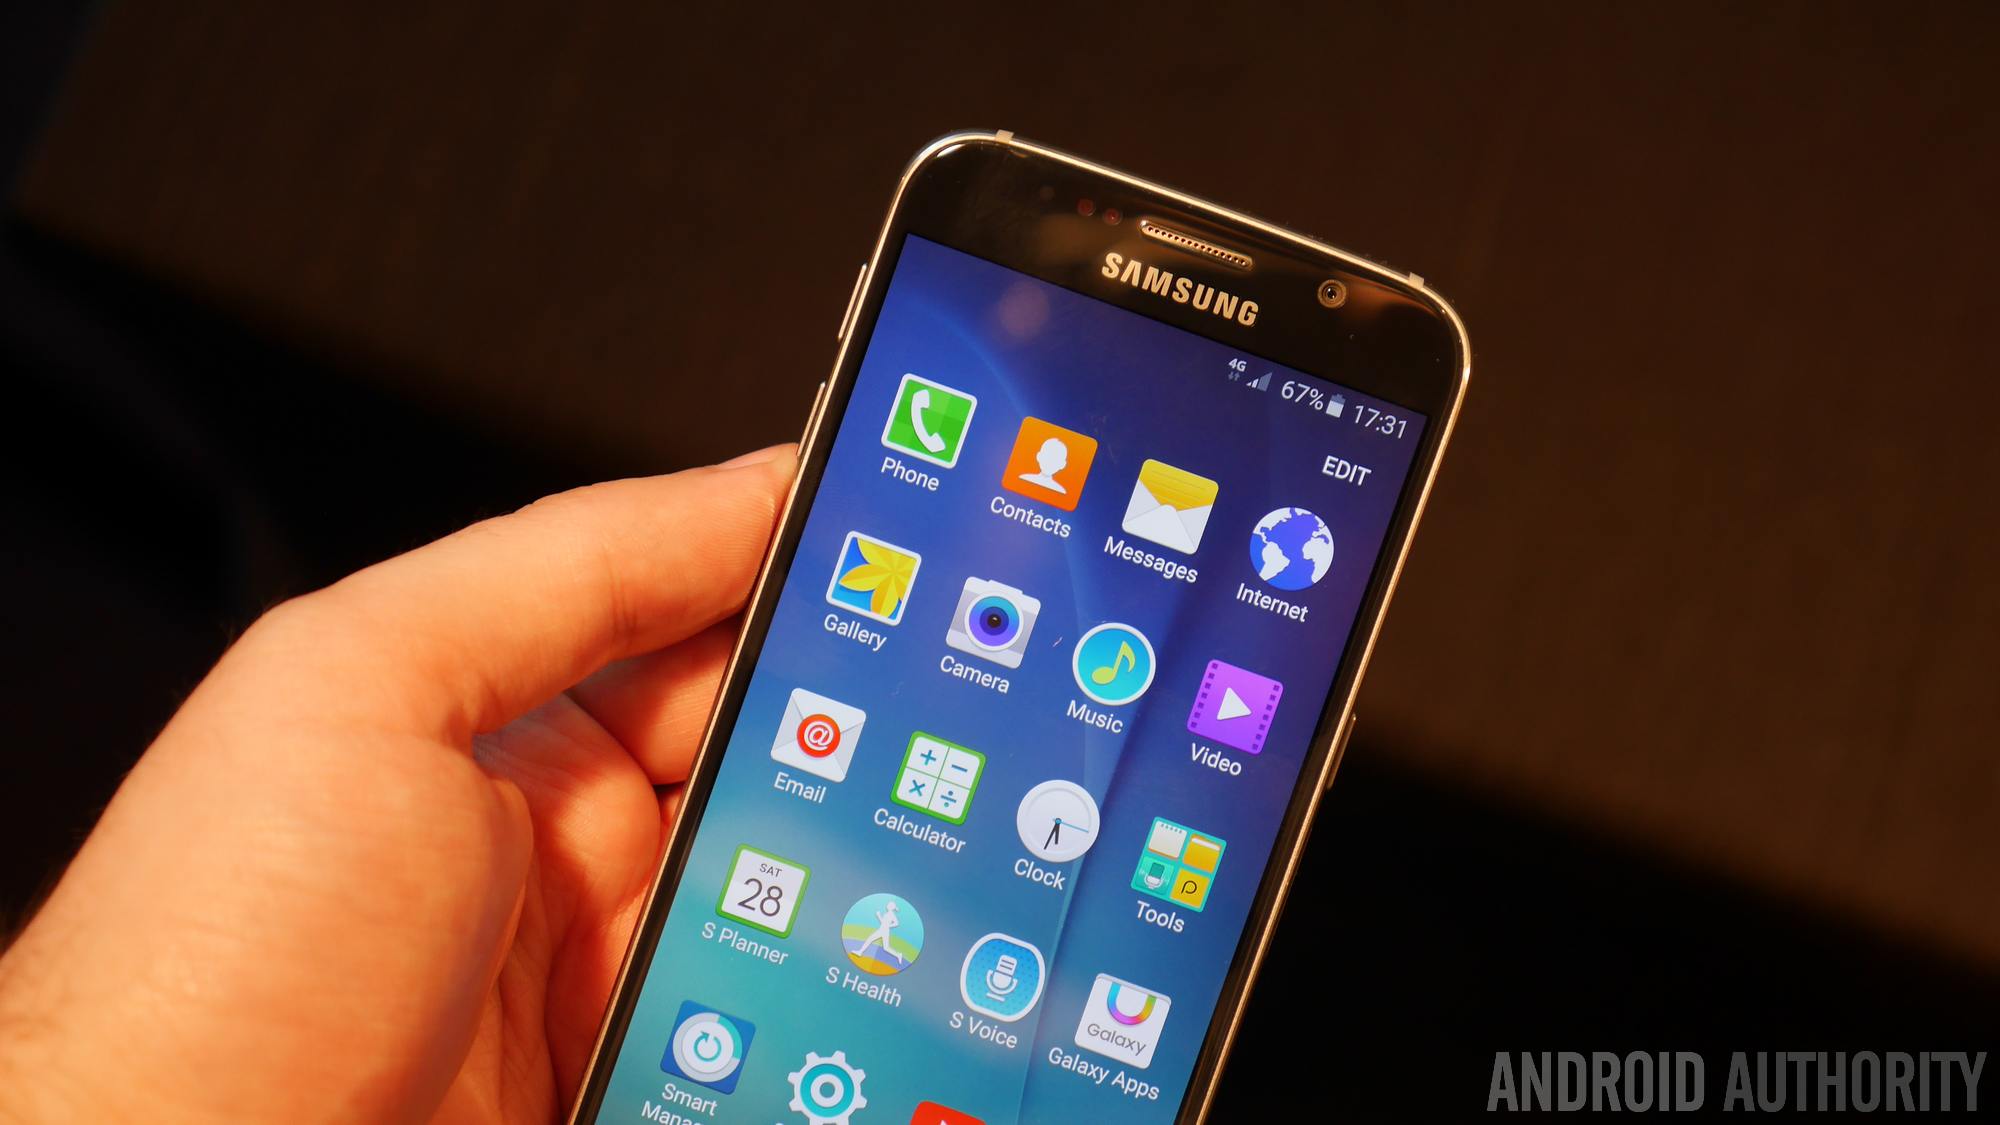 Grab Samsung's Galaxy S6 apps and wallpapers here